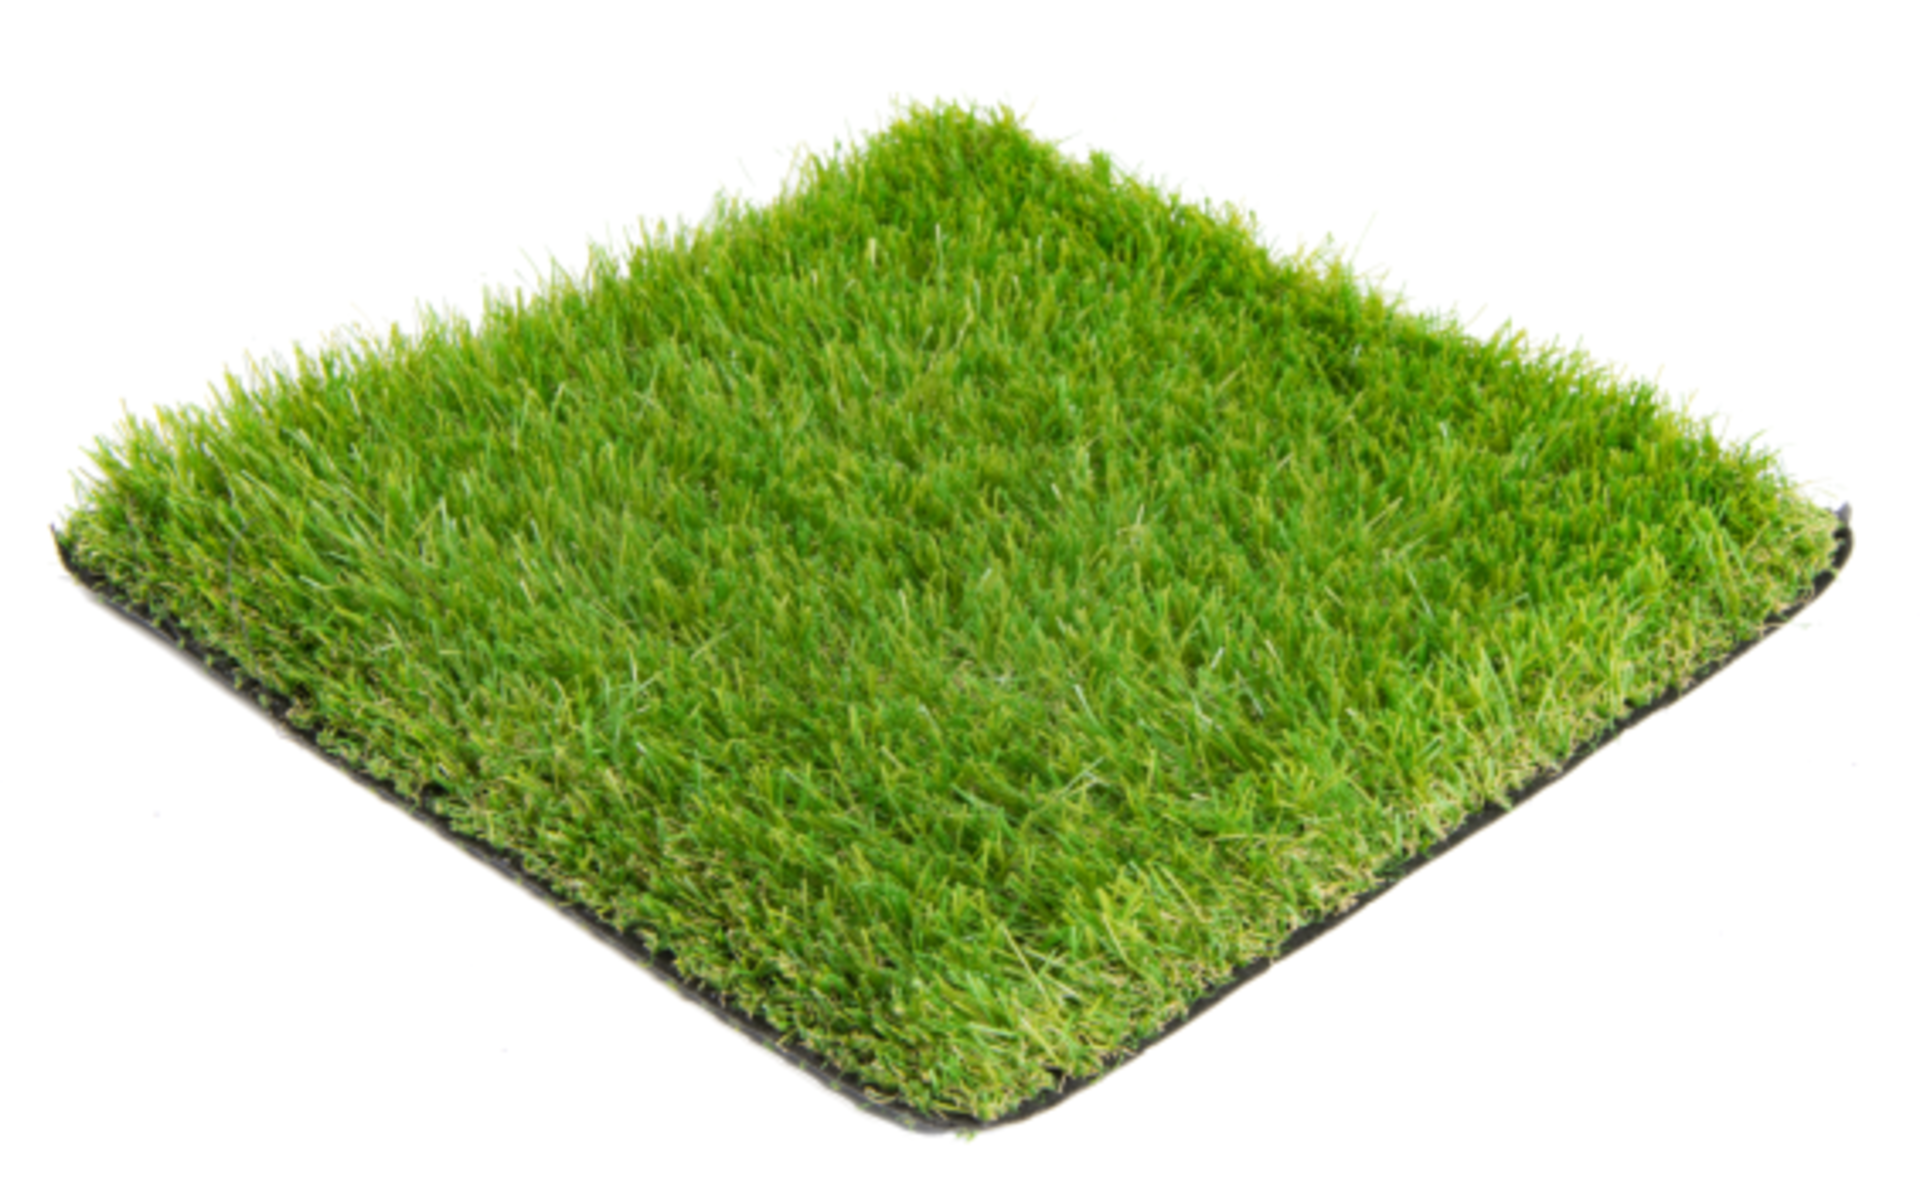 A Half Roll of Natural 35 Artificial Grass, 12.5 meters x 4 meters